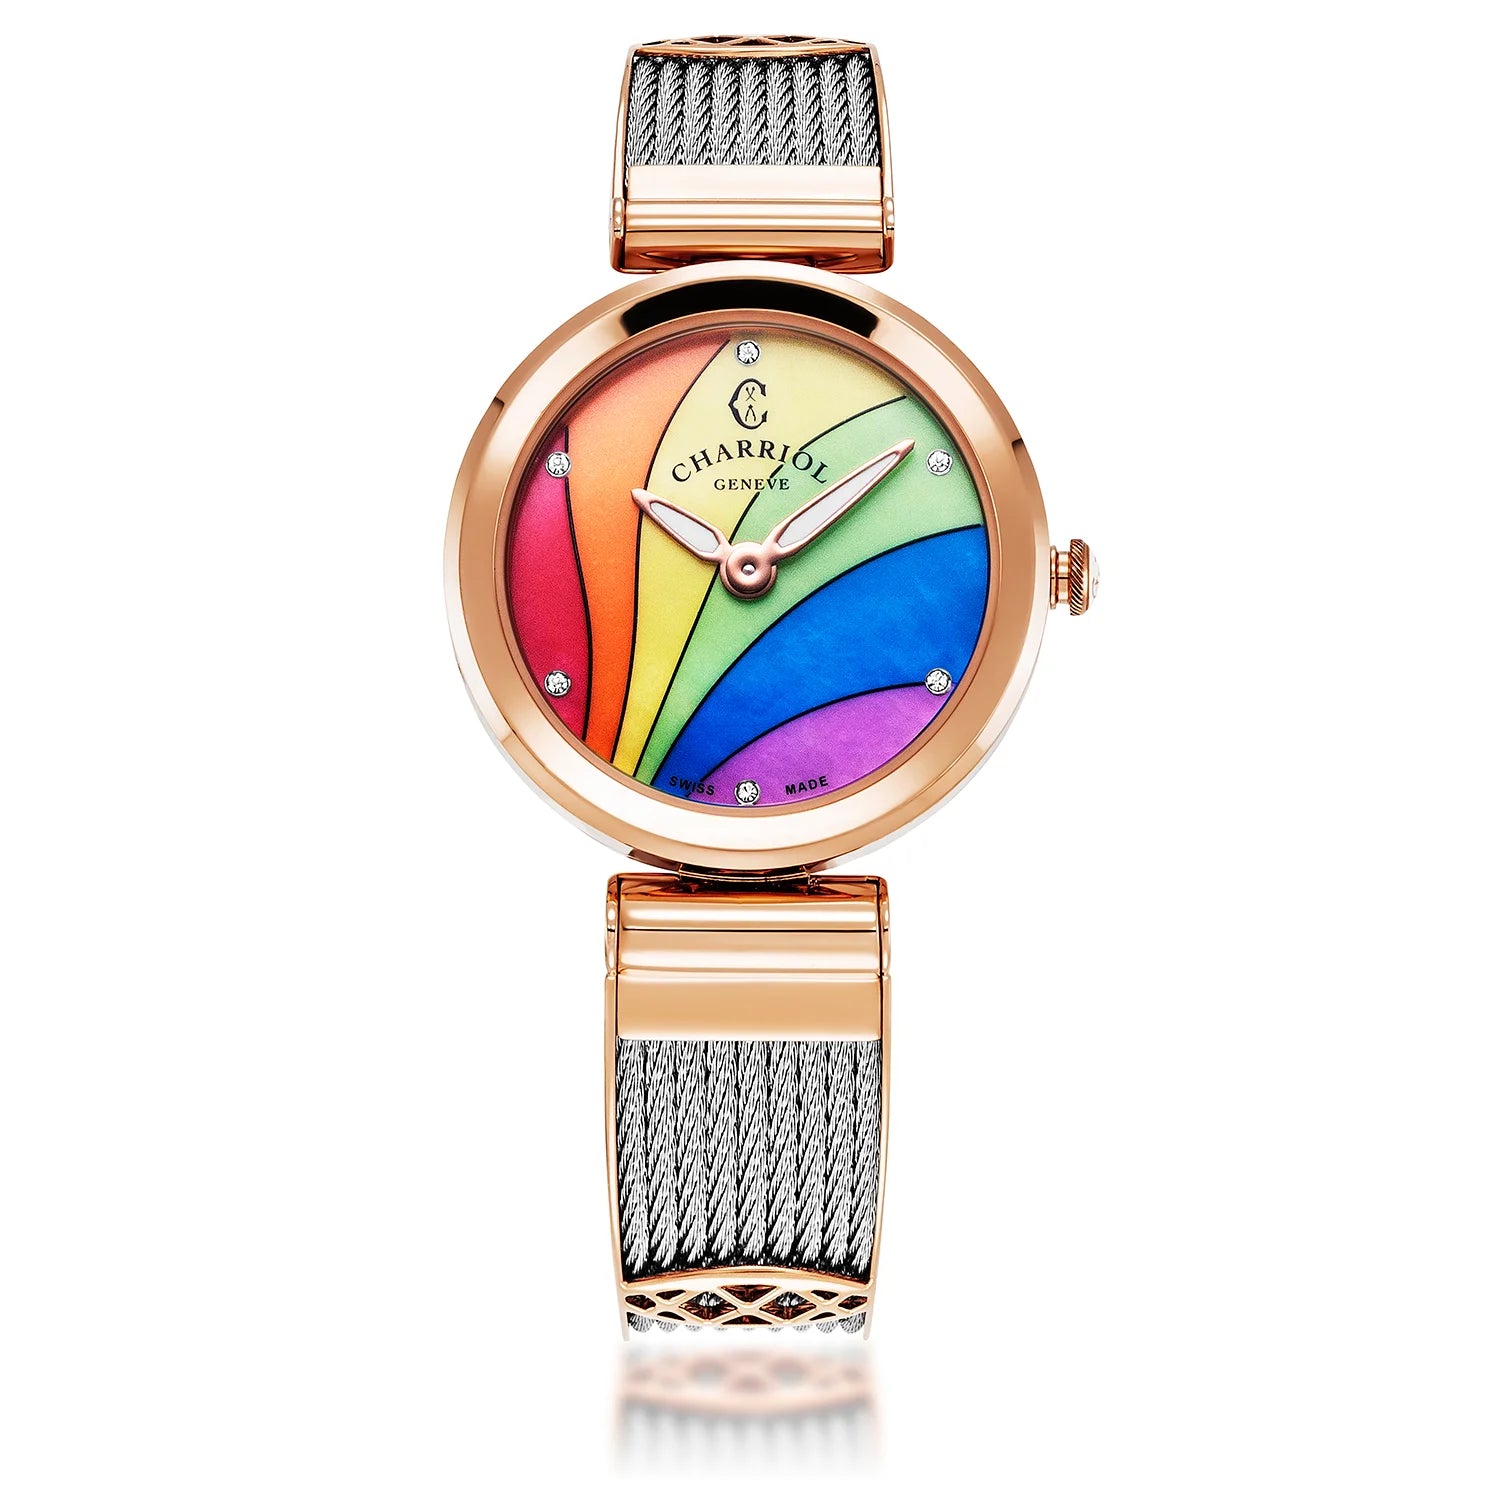 FOREVER, 32MM, QUARTZ CALIBRE, RAINBOW WITH 6 ZIRCONIAS DIAL, STEEL ROSE GOLD PVD BEZEL, STEEL CABLE BRACELET - Charriol Geneve -  Watch